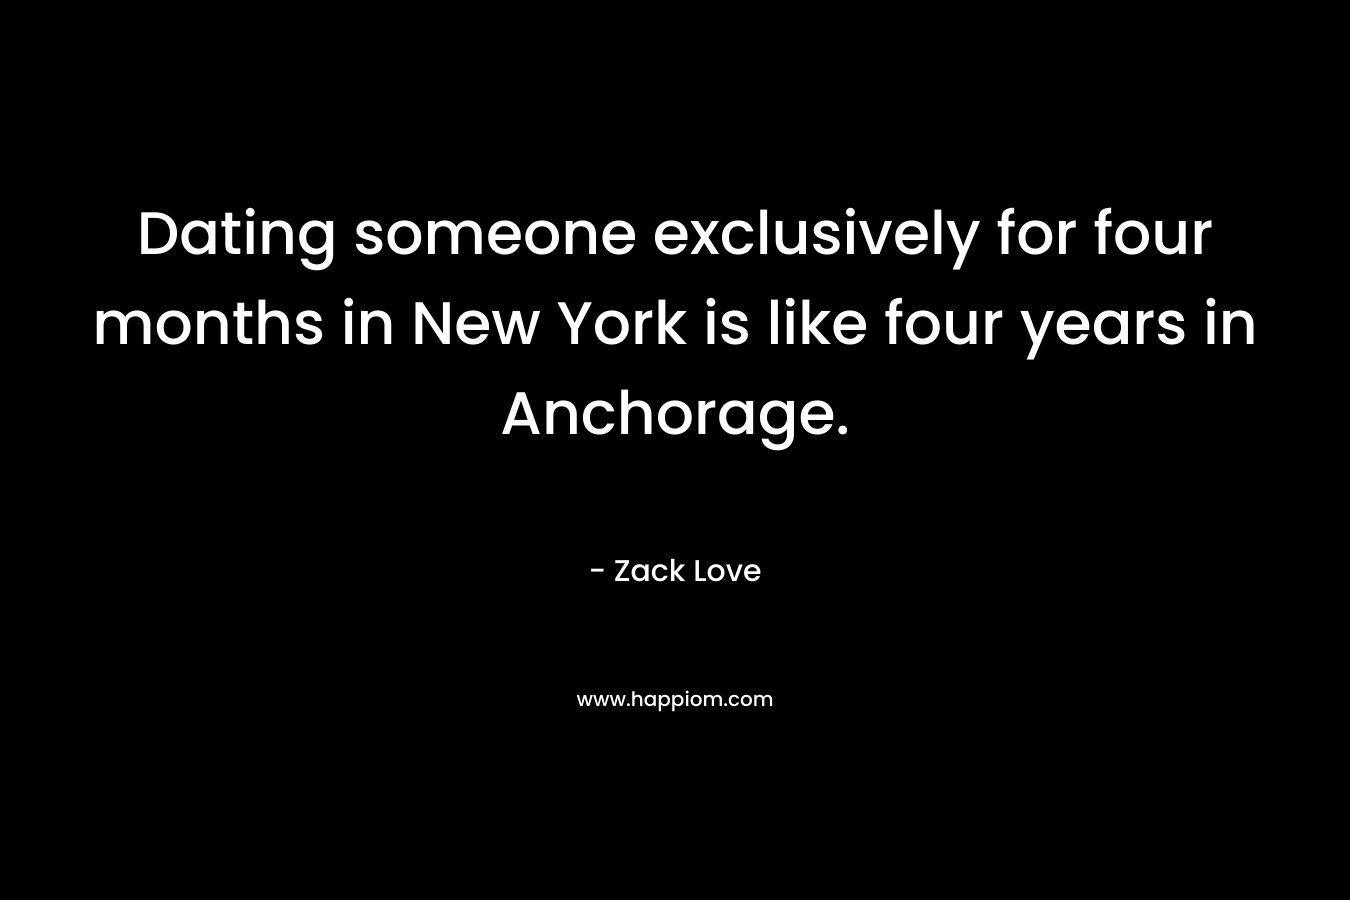 Dating someone exclusively for four months in New York is like four years in Anchorage.